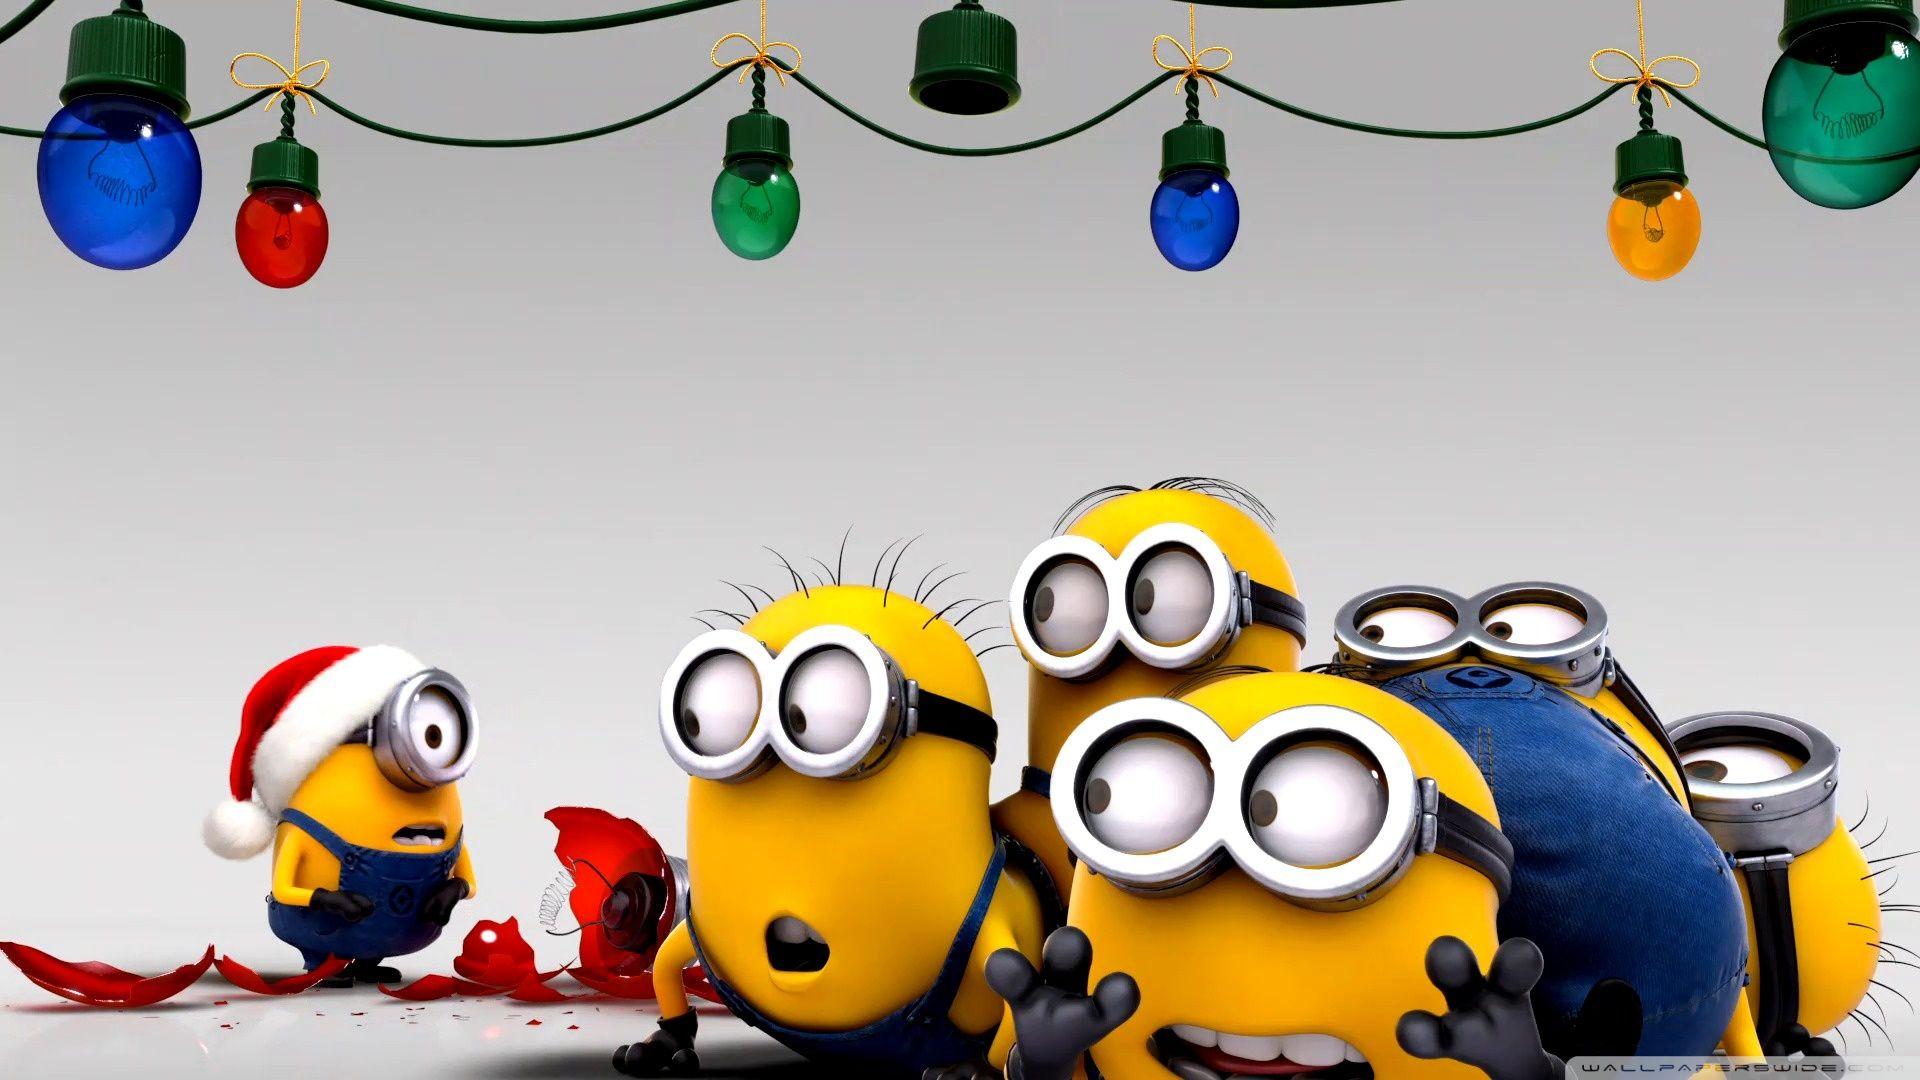 Minion 4K wallpapers for your desktop or mobile screen free and easy to  download